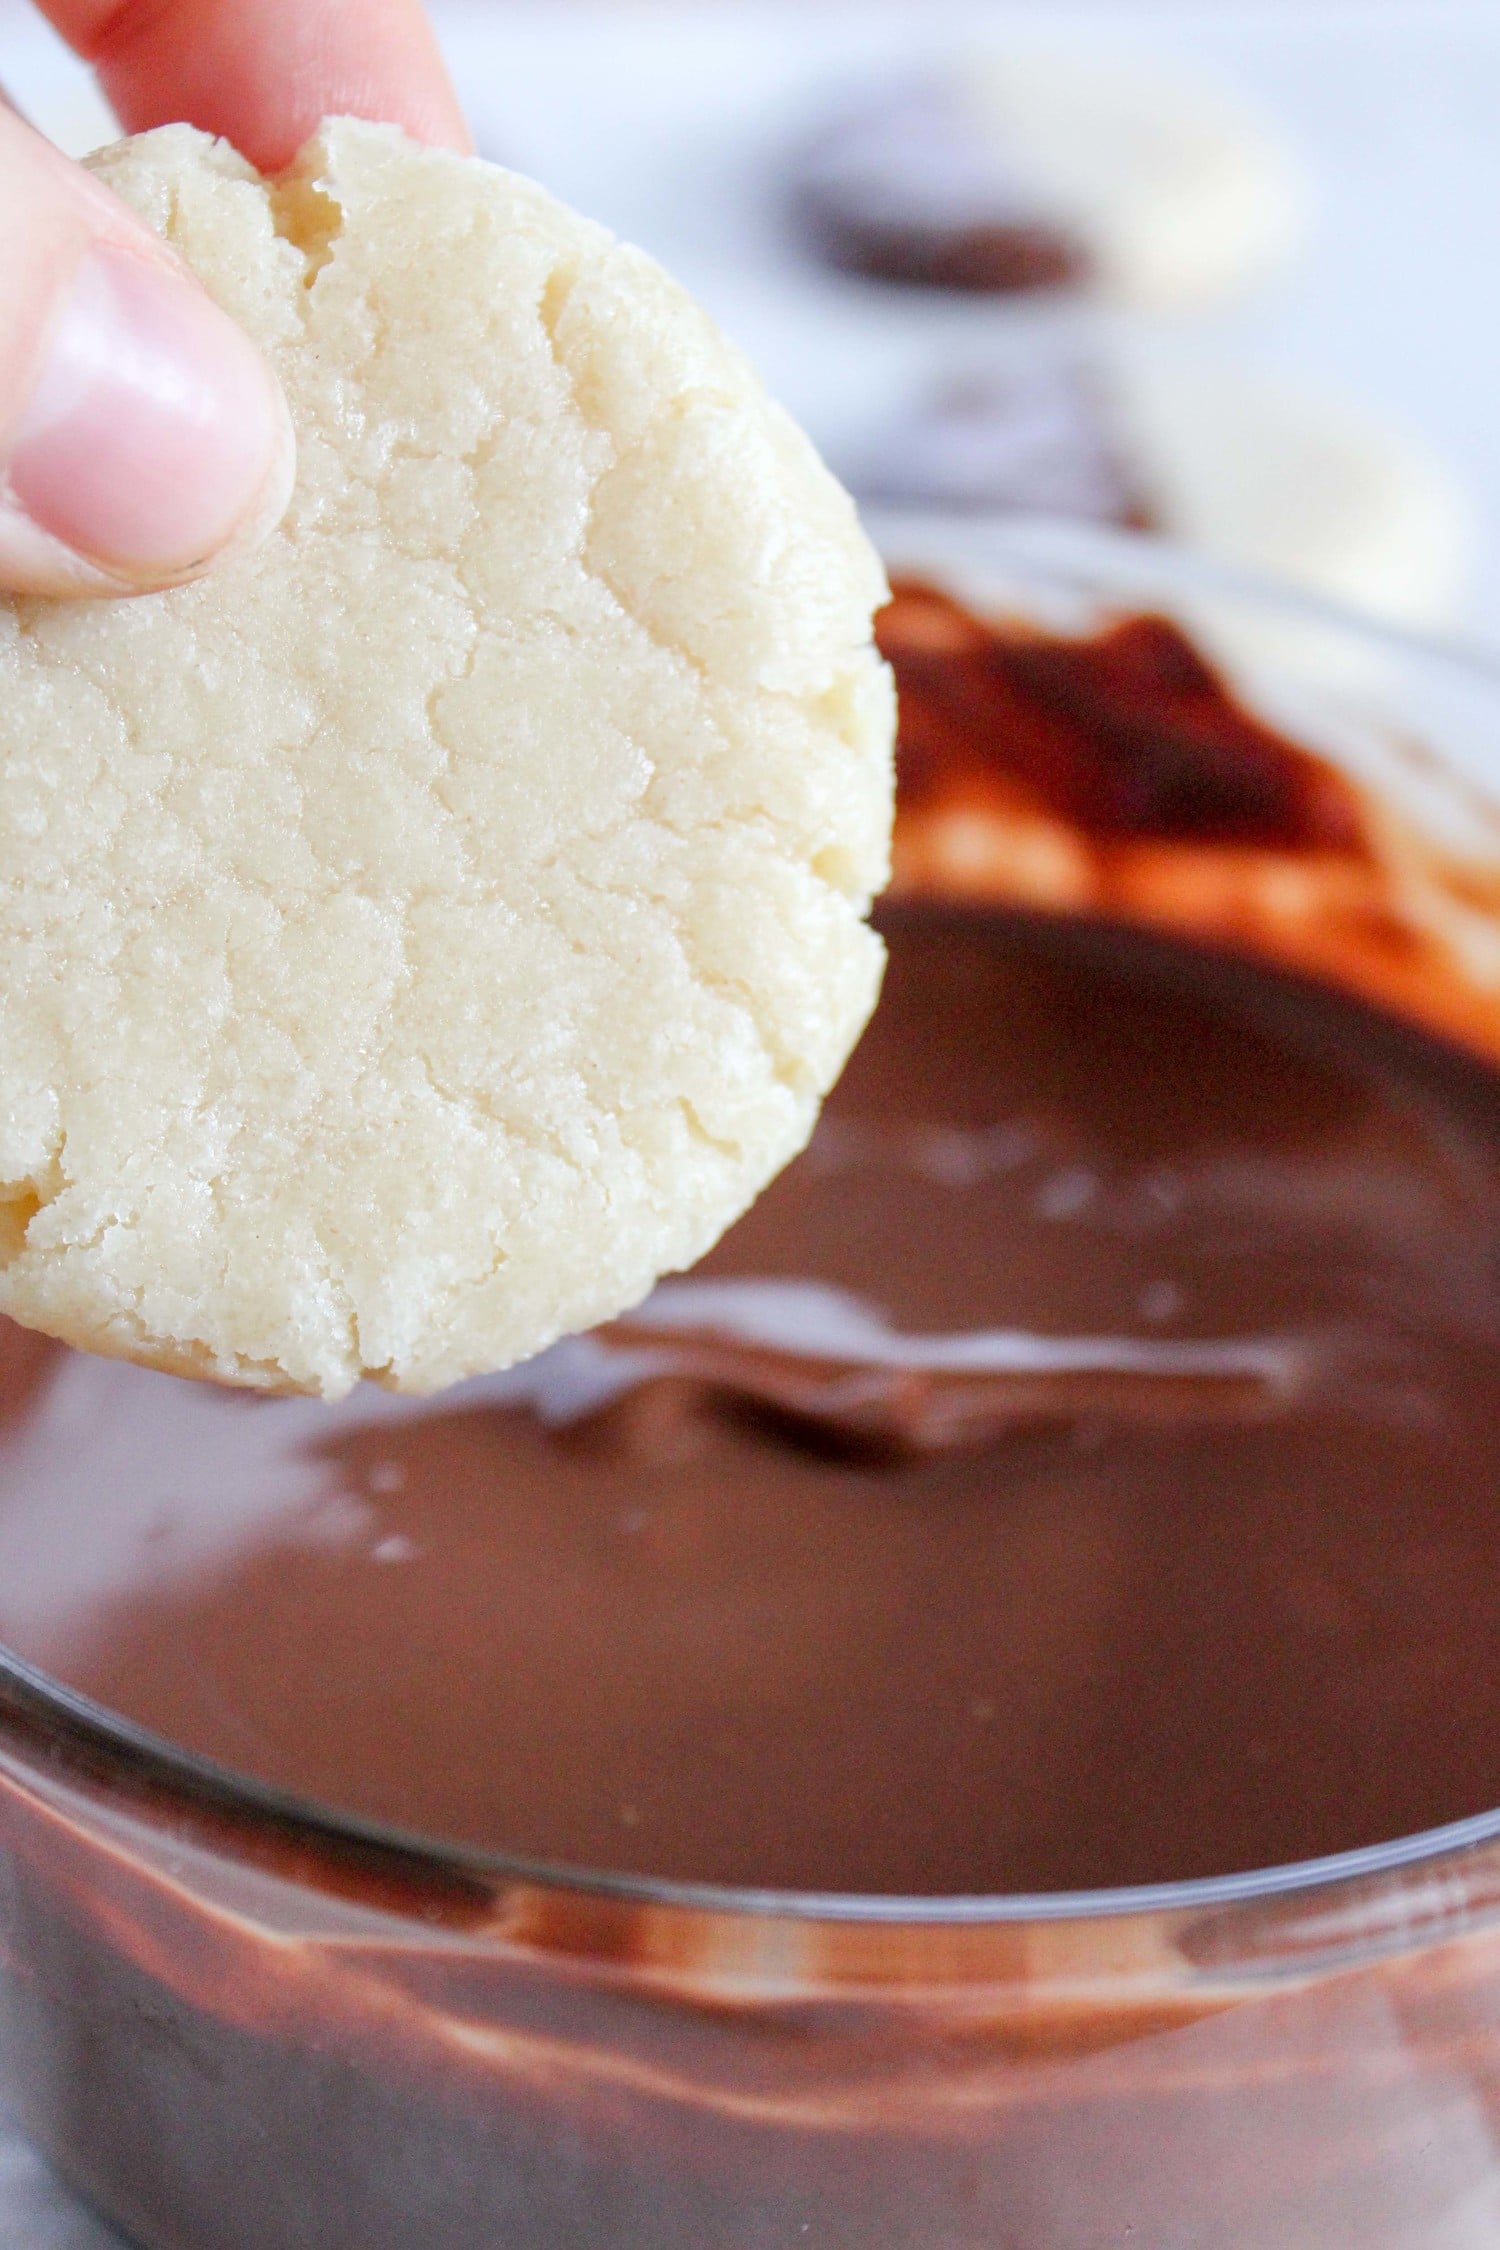 dipping an almond shortbread cookie into melted chocolate